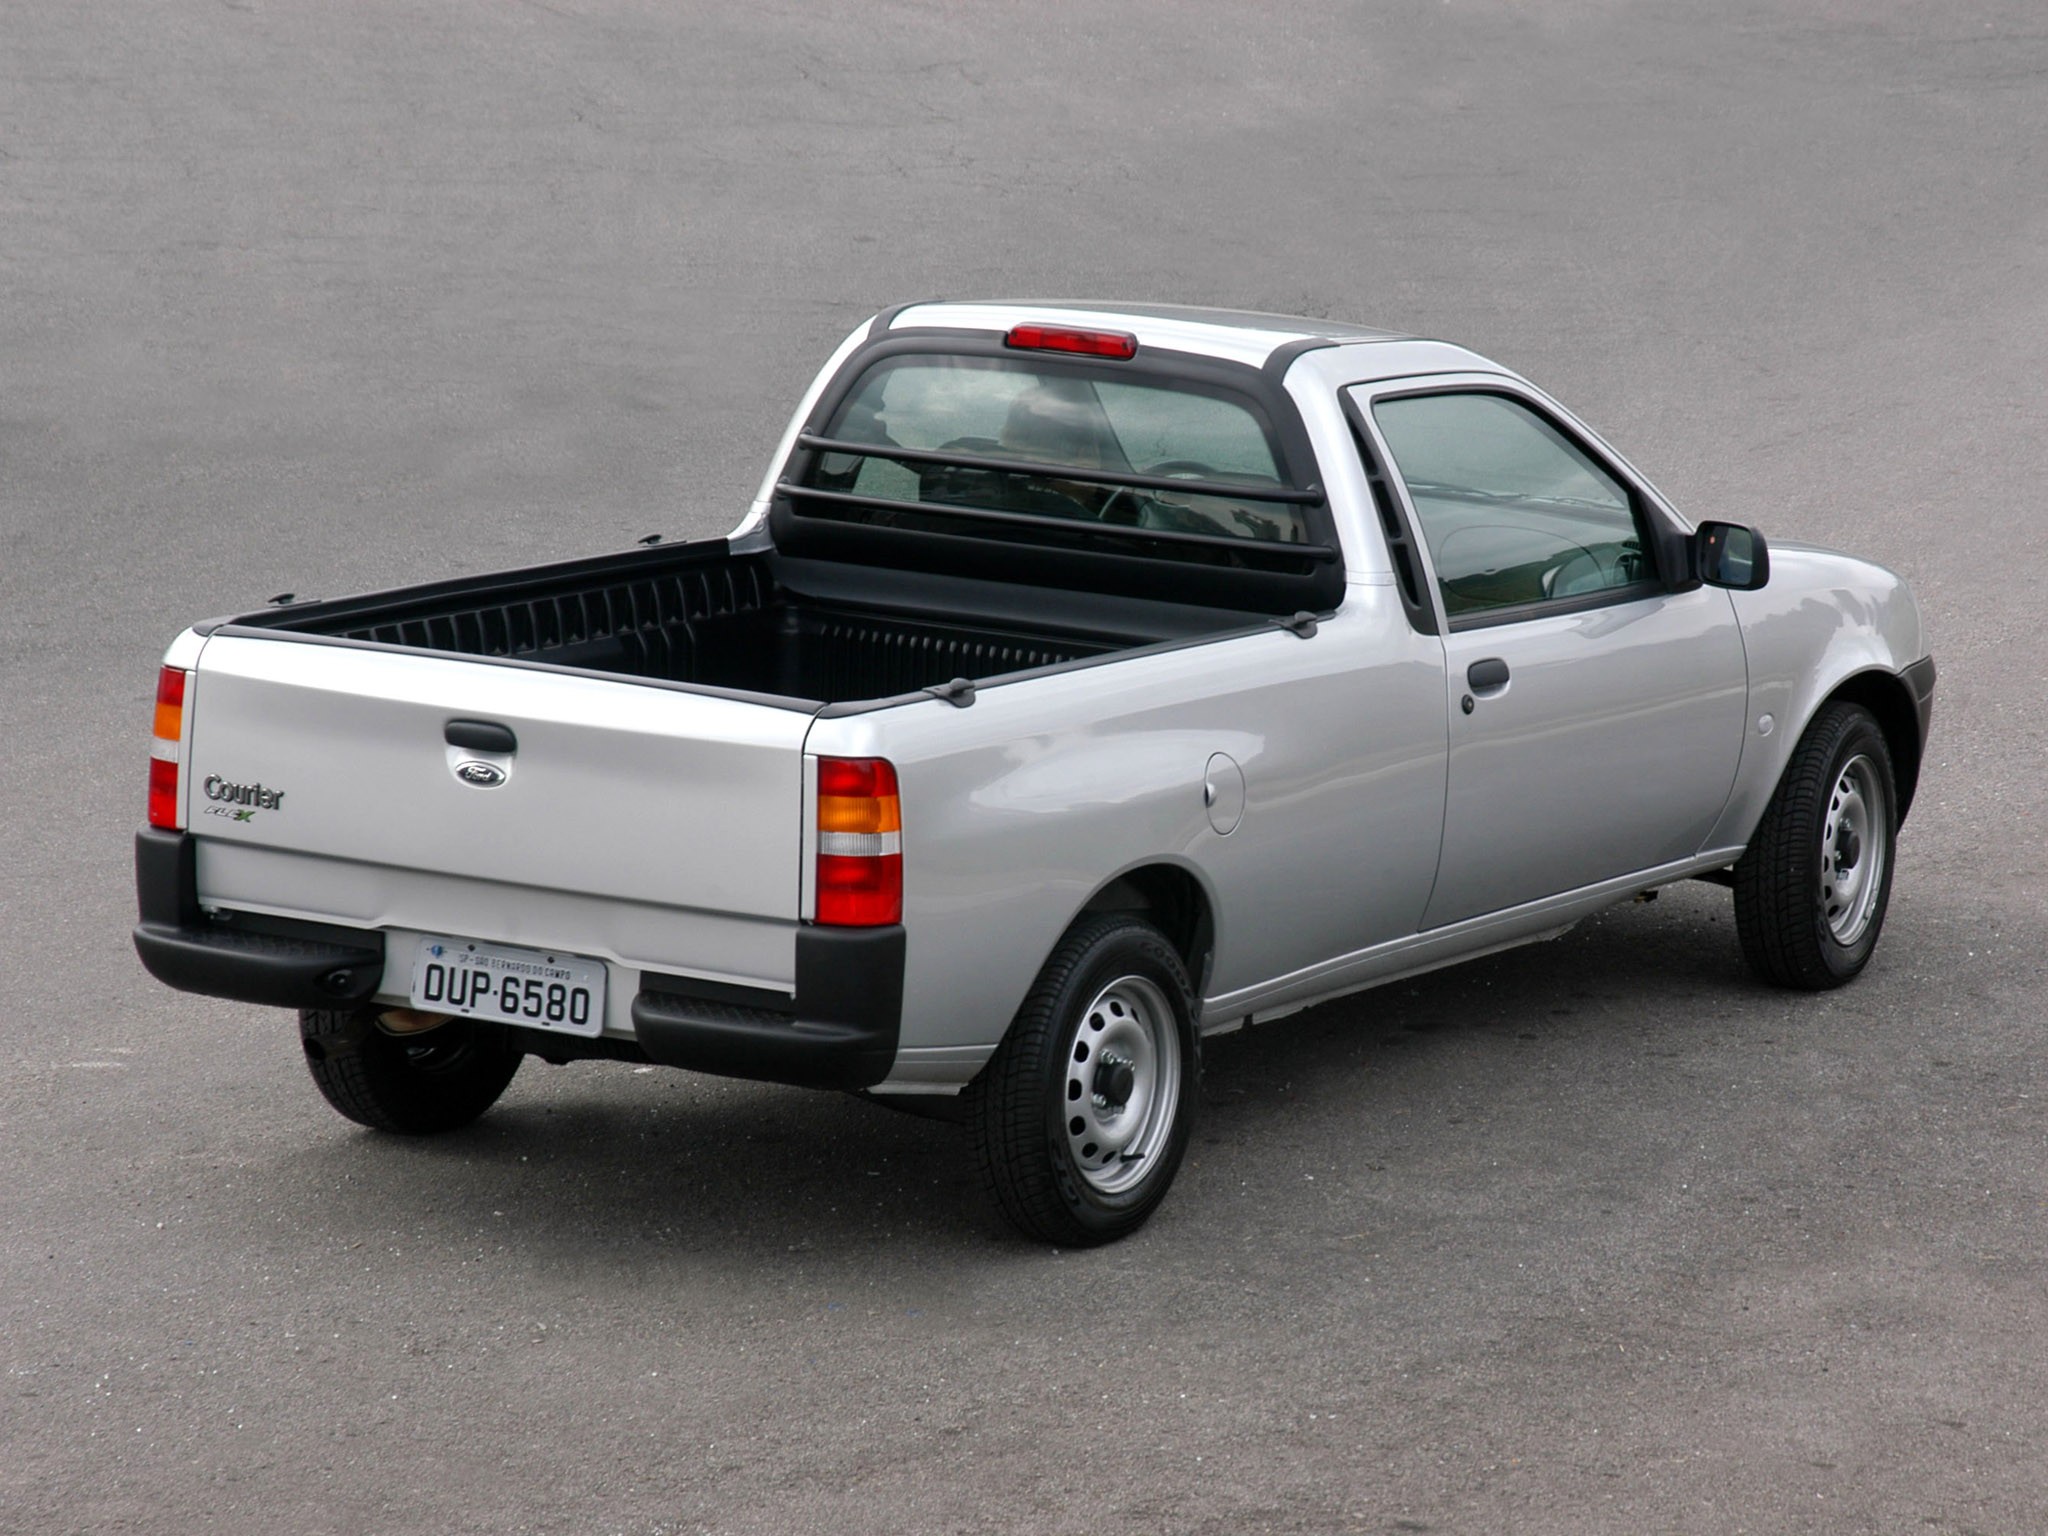 Ford Compact Pickup Truck